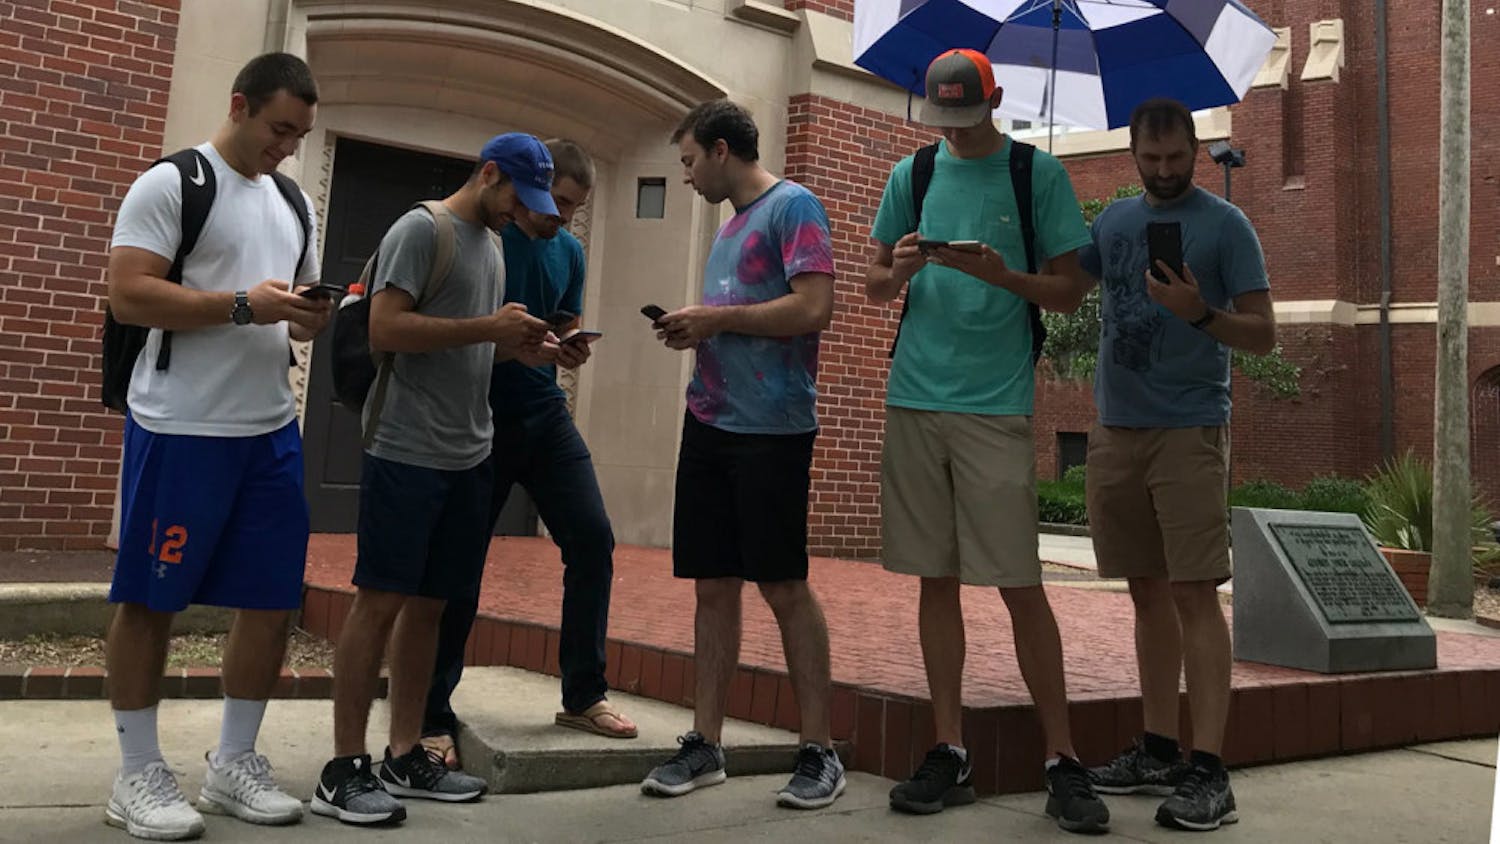 AJ Ariondo, 22, second from left; Nick Zeak, 23, third from right; and Rett Timberlake, 21, second from right, brave the weather Saturday to play “Pokemon Go.”